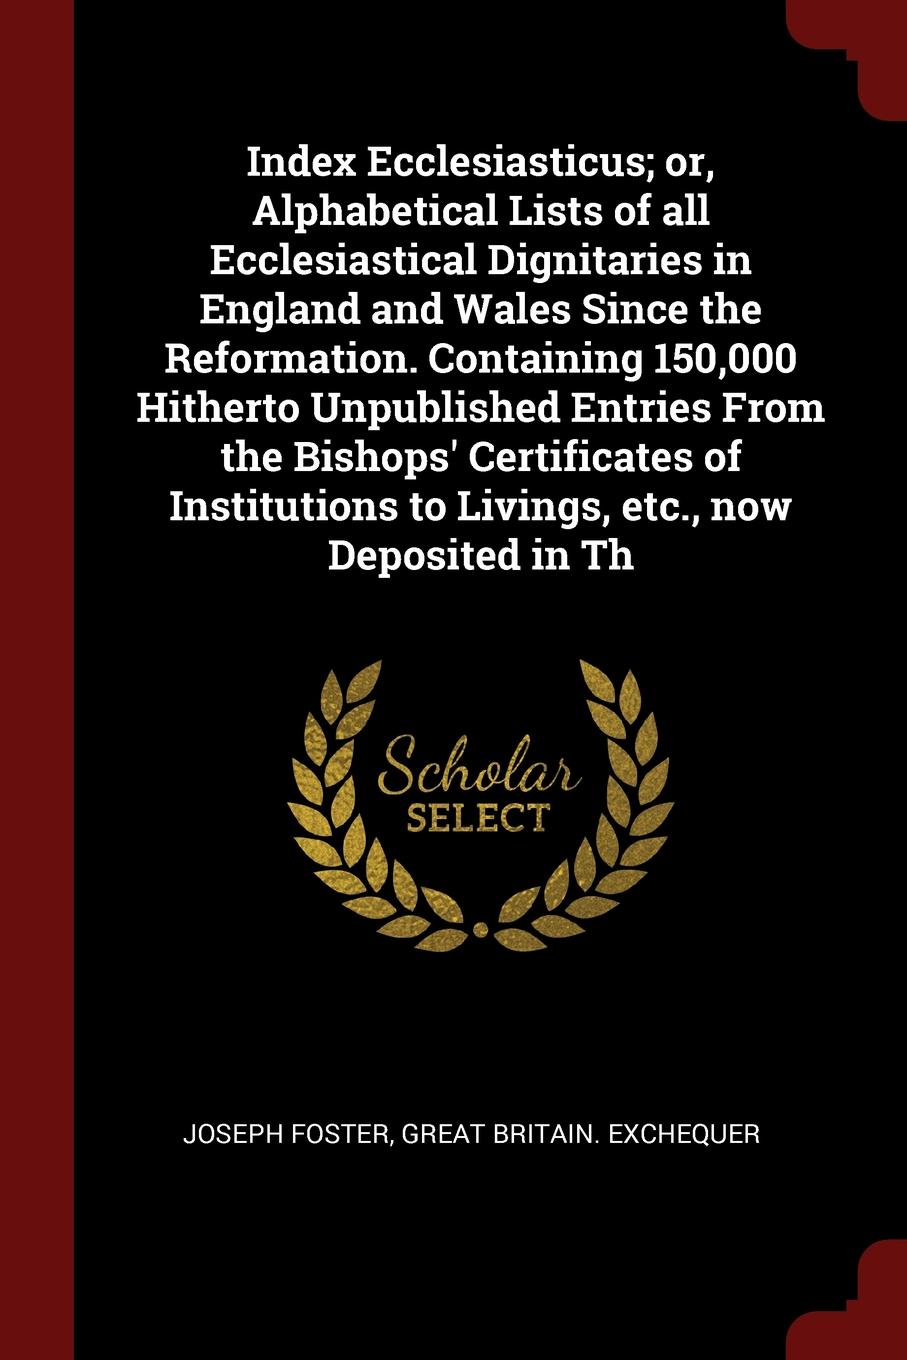 Index Ecclesiasticus; or, Alphabetical Lists of all Ecclesiastical Dignitaries in England and Wales Since the Reformation. Containing 150,000 Hitherto Unpublished Entries From the Bishops` Certificates of Institutions to Livings, etc., now Deposit...